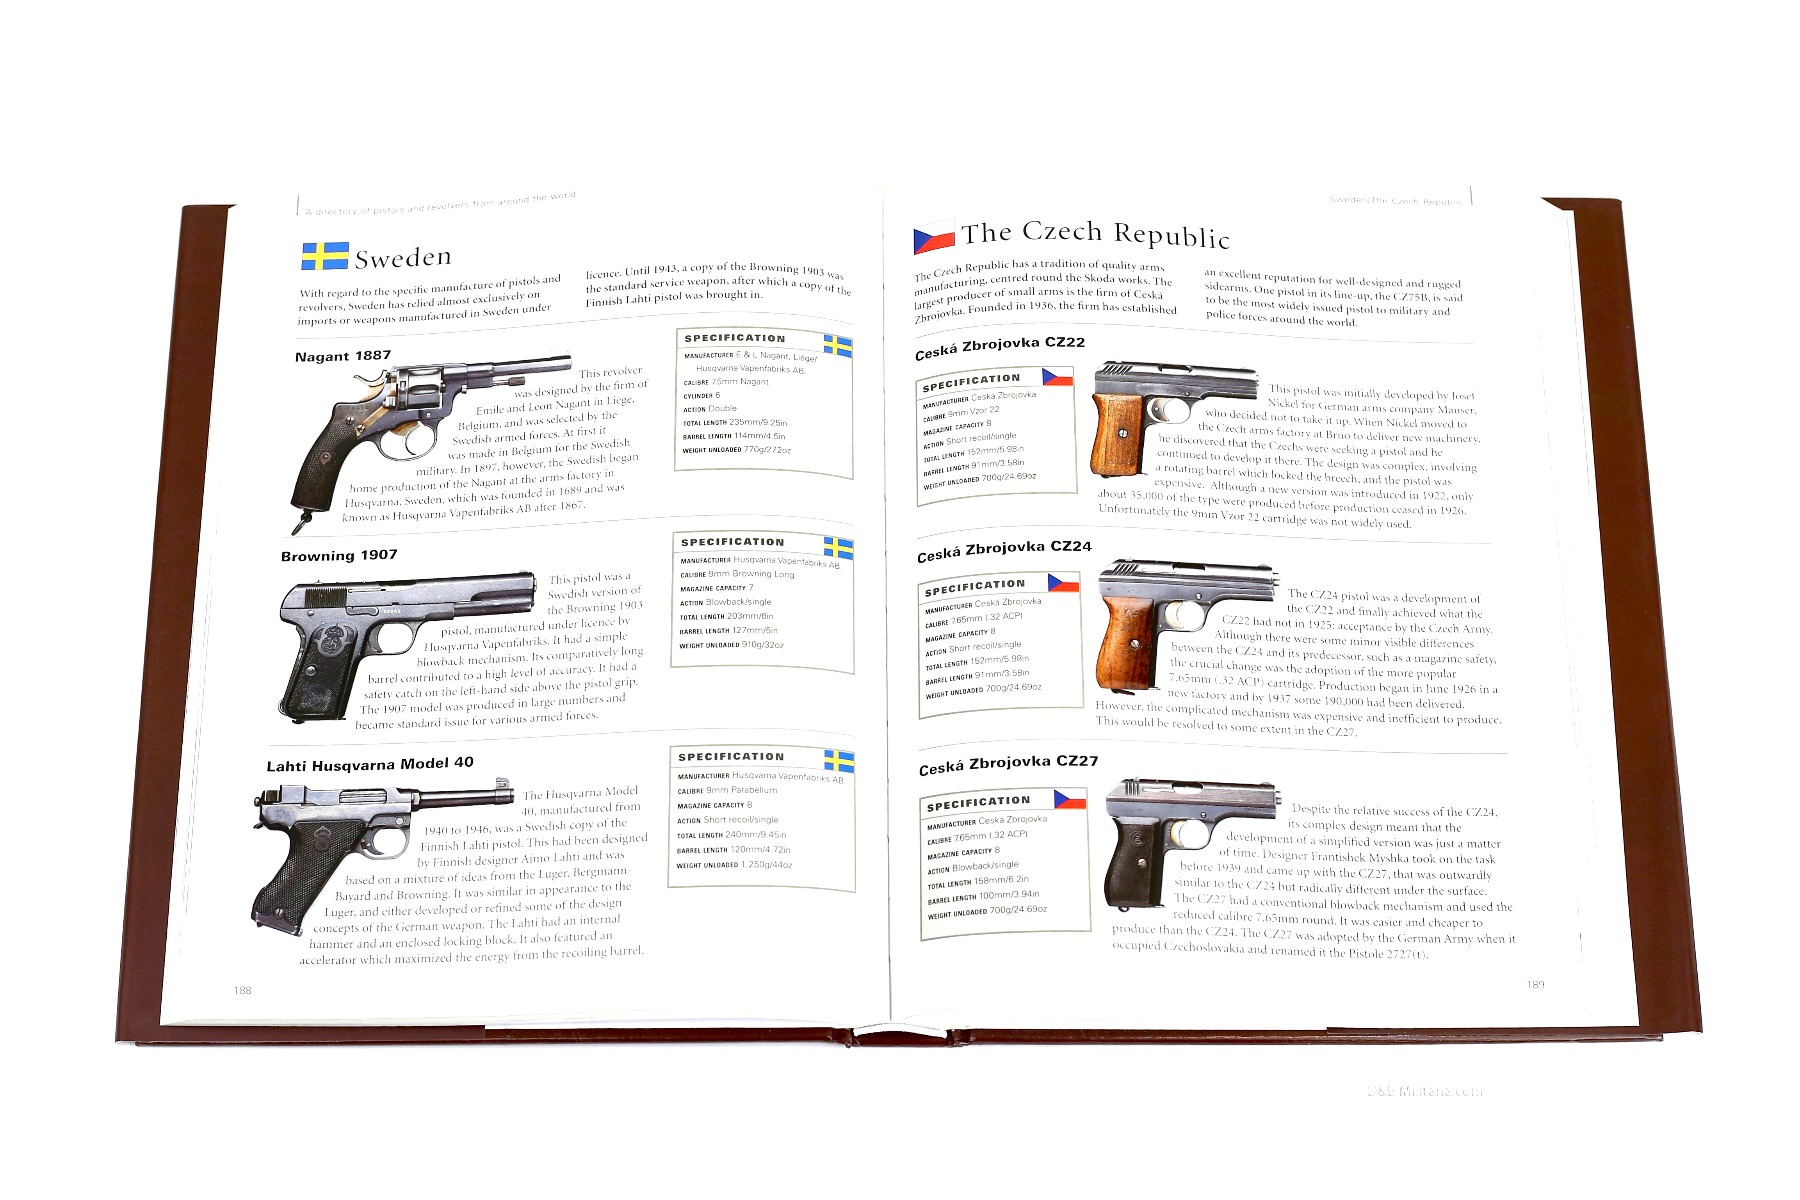 the illustrated world encyclopedia of guns free download